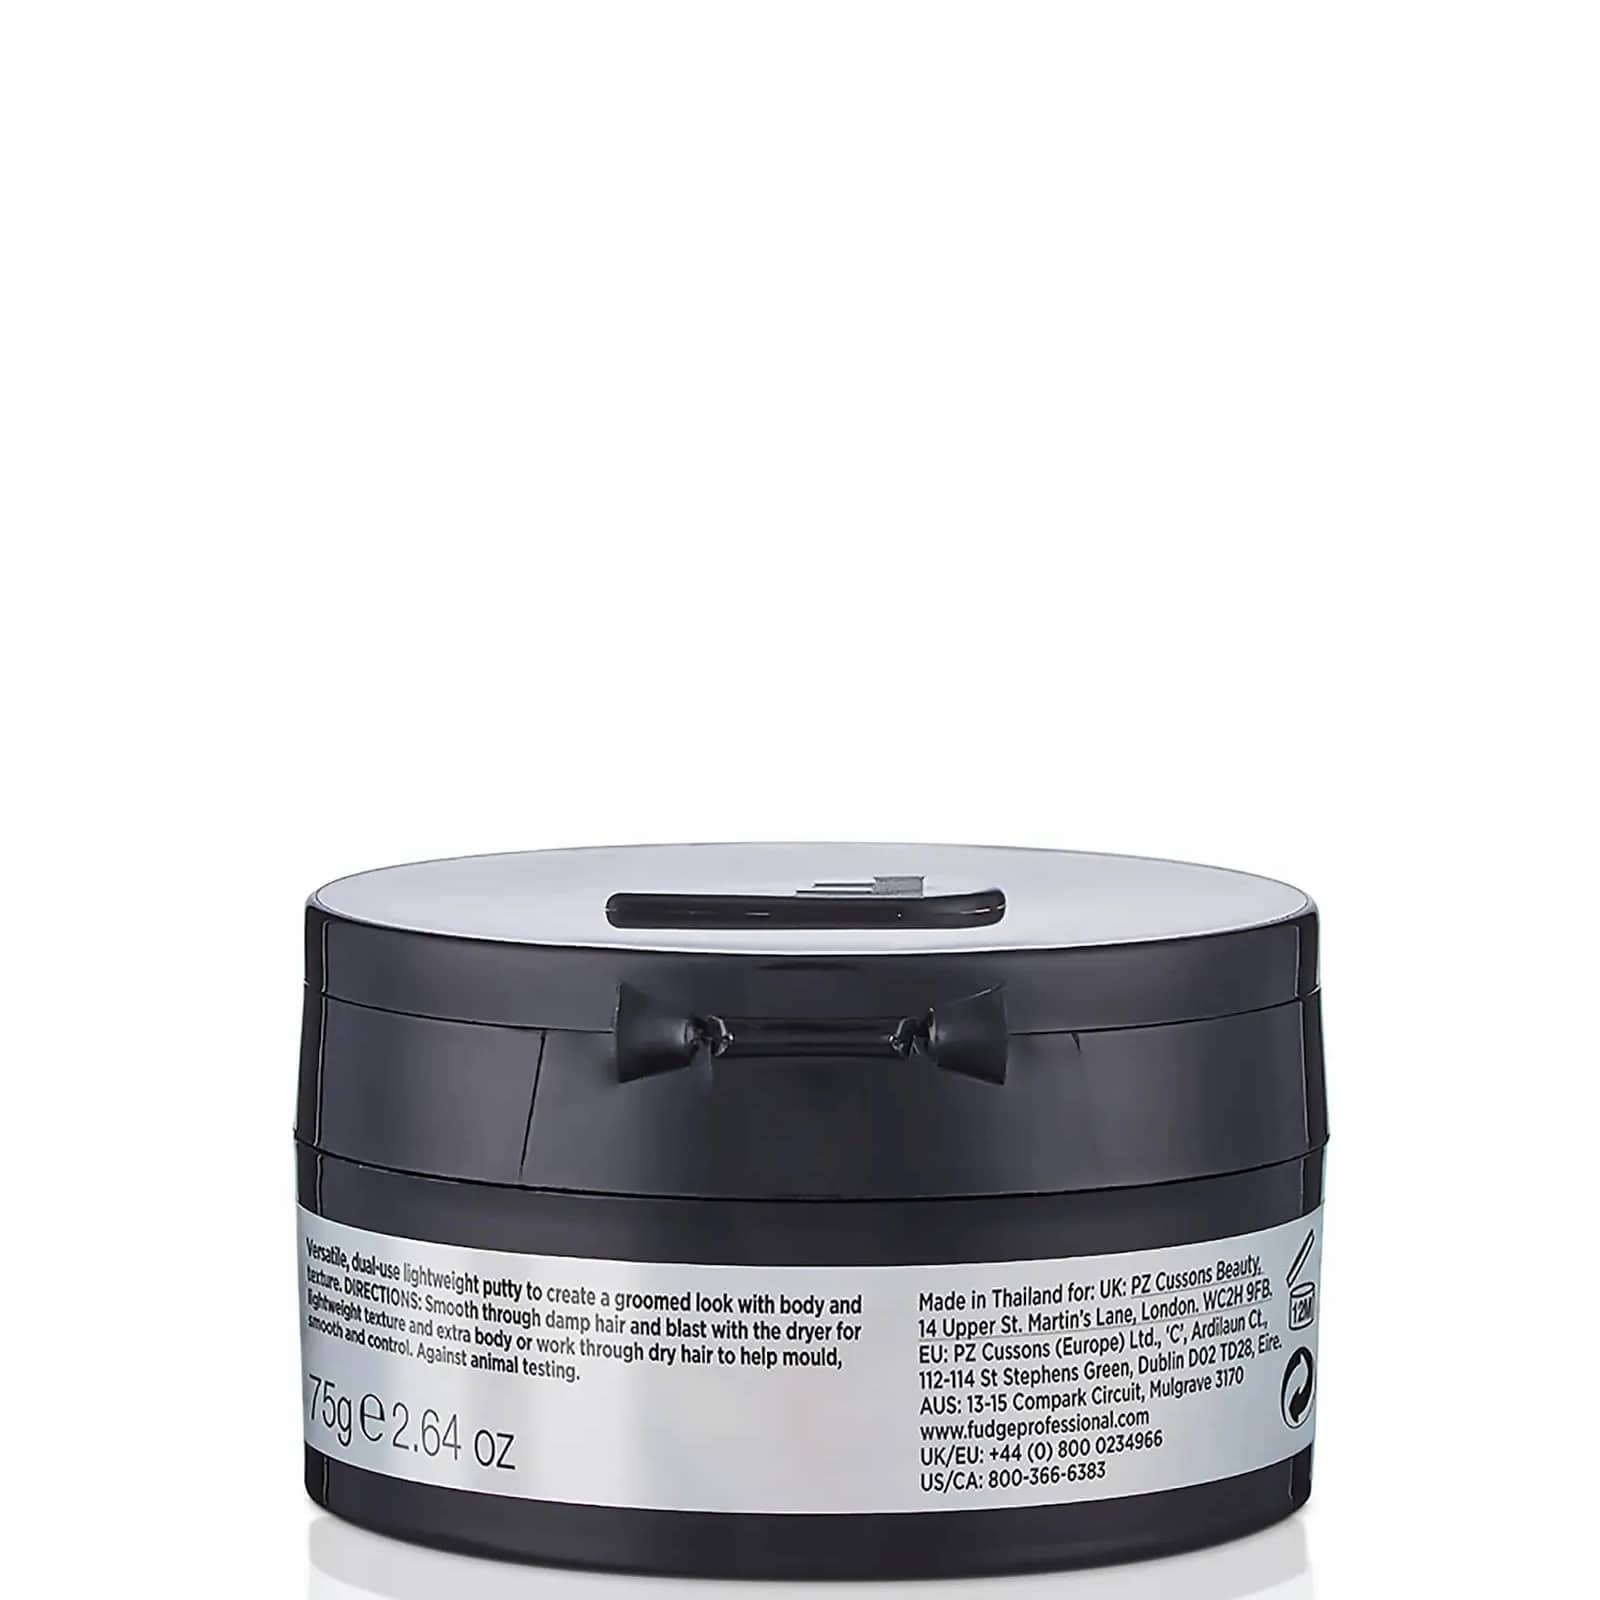 Fudge Grooming Putty 75g | Co Hair BUY | North ONLINE Laine